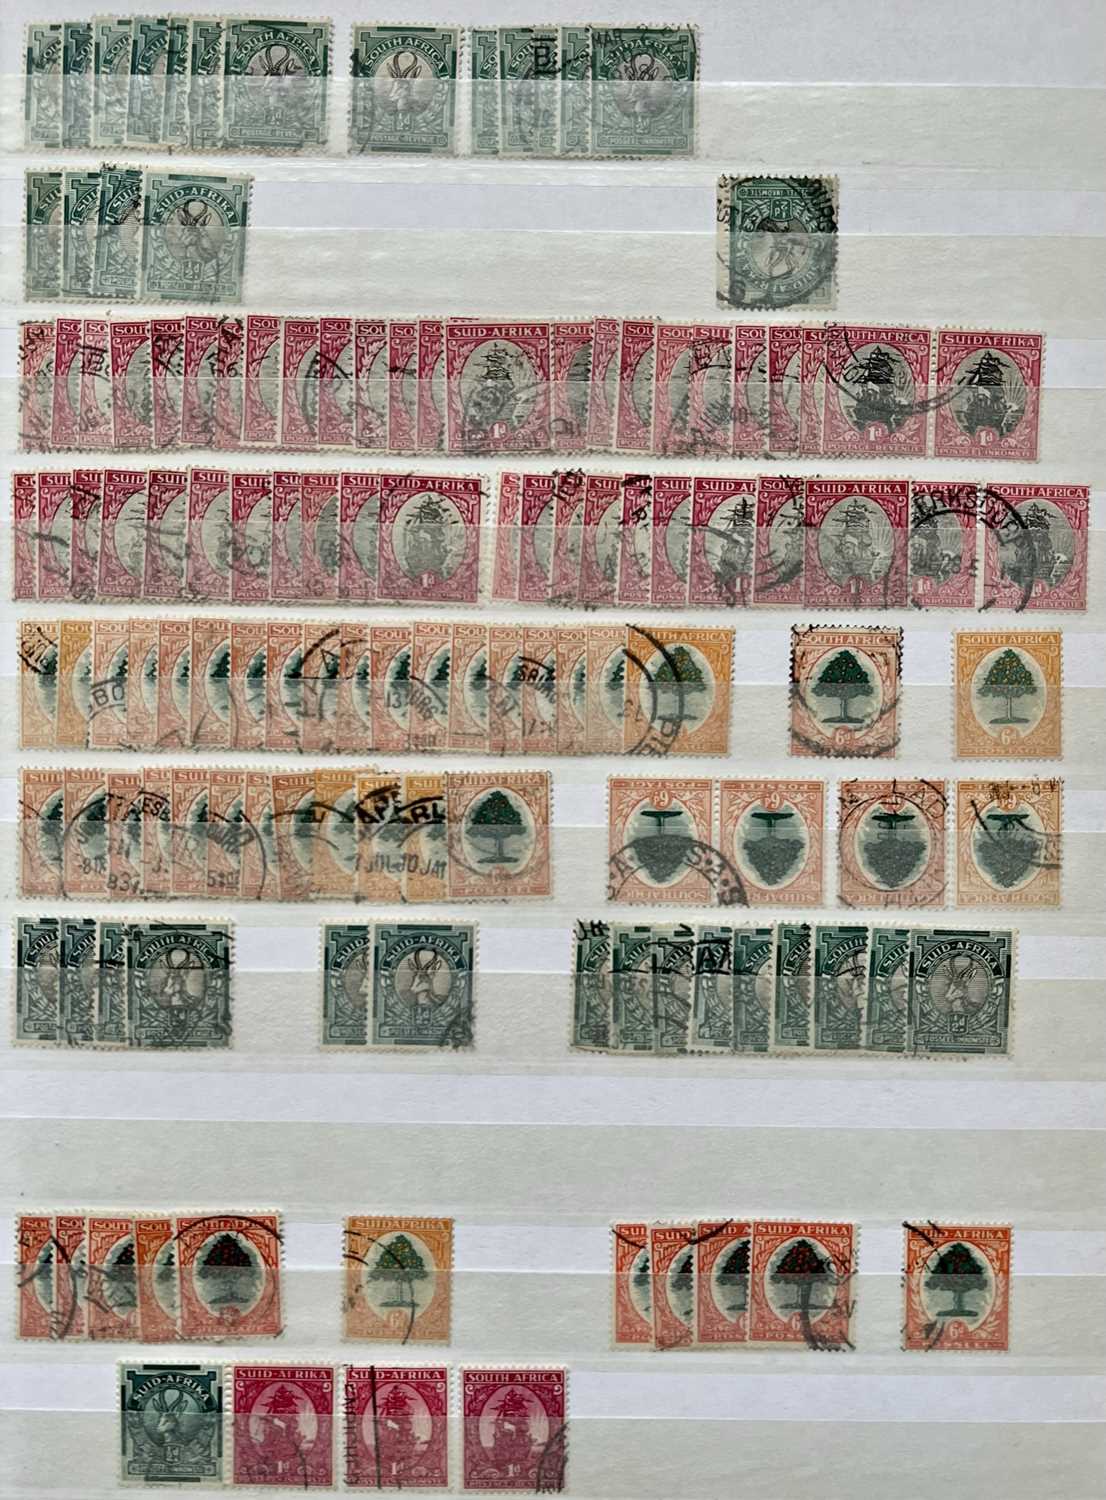 SOUTH AFRICA & SOUTH WEST AFRICA - mainly used, some unmounted mint, many hundreds - Image 2 of 15